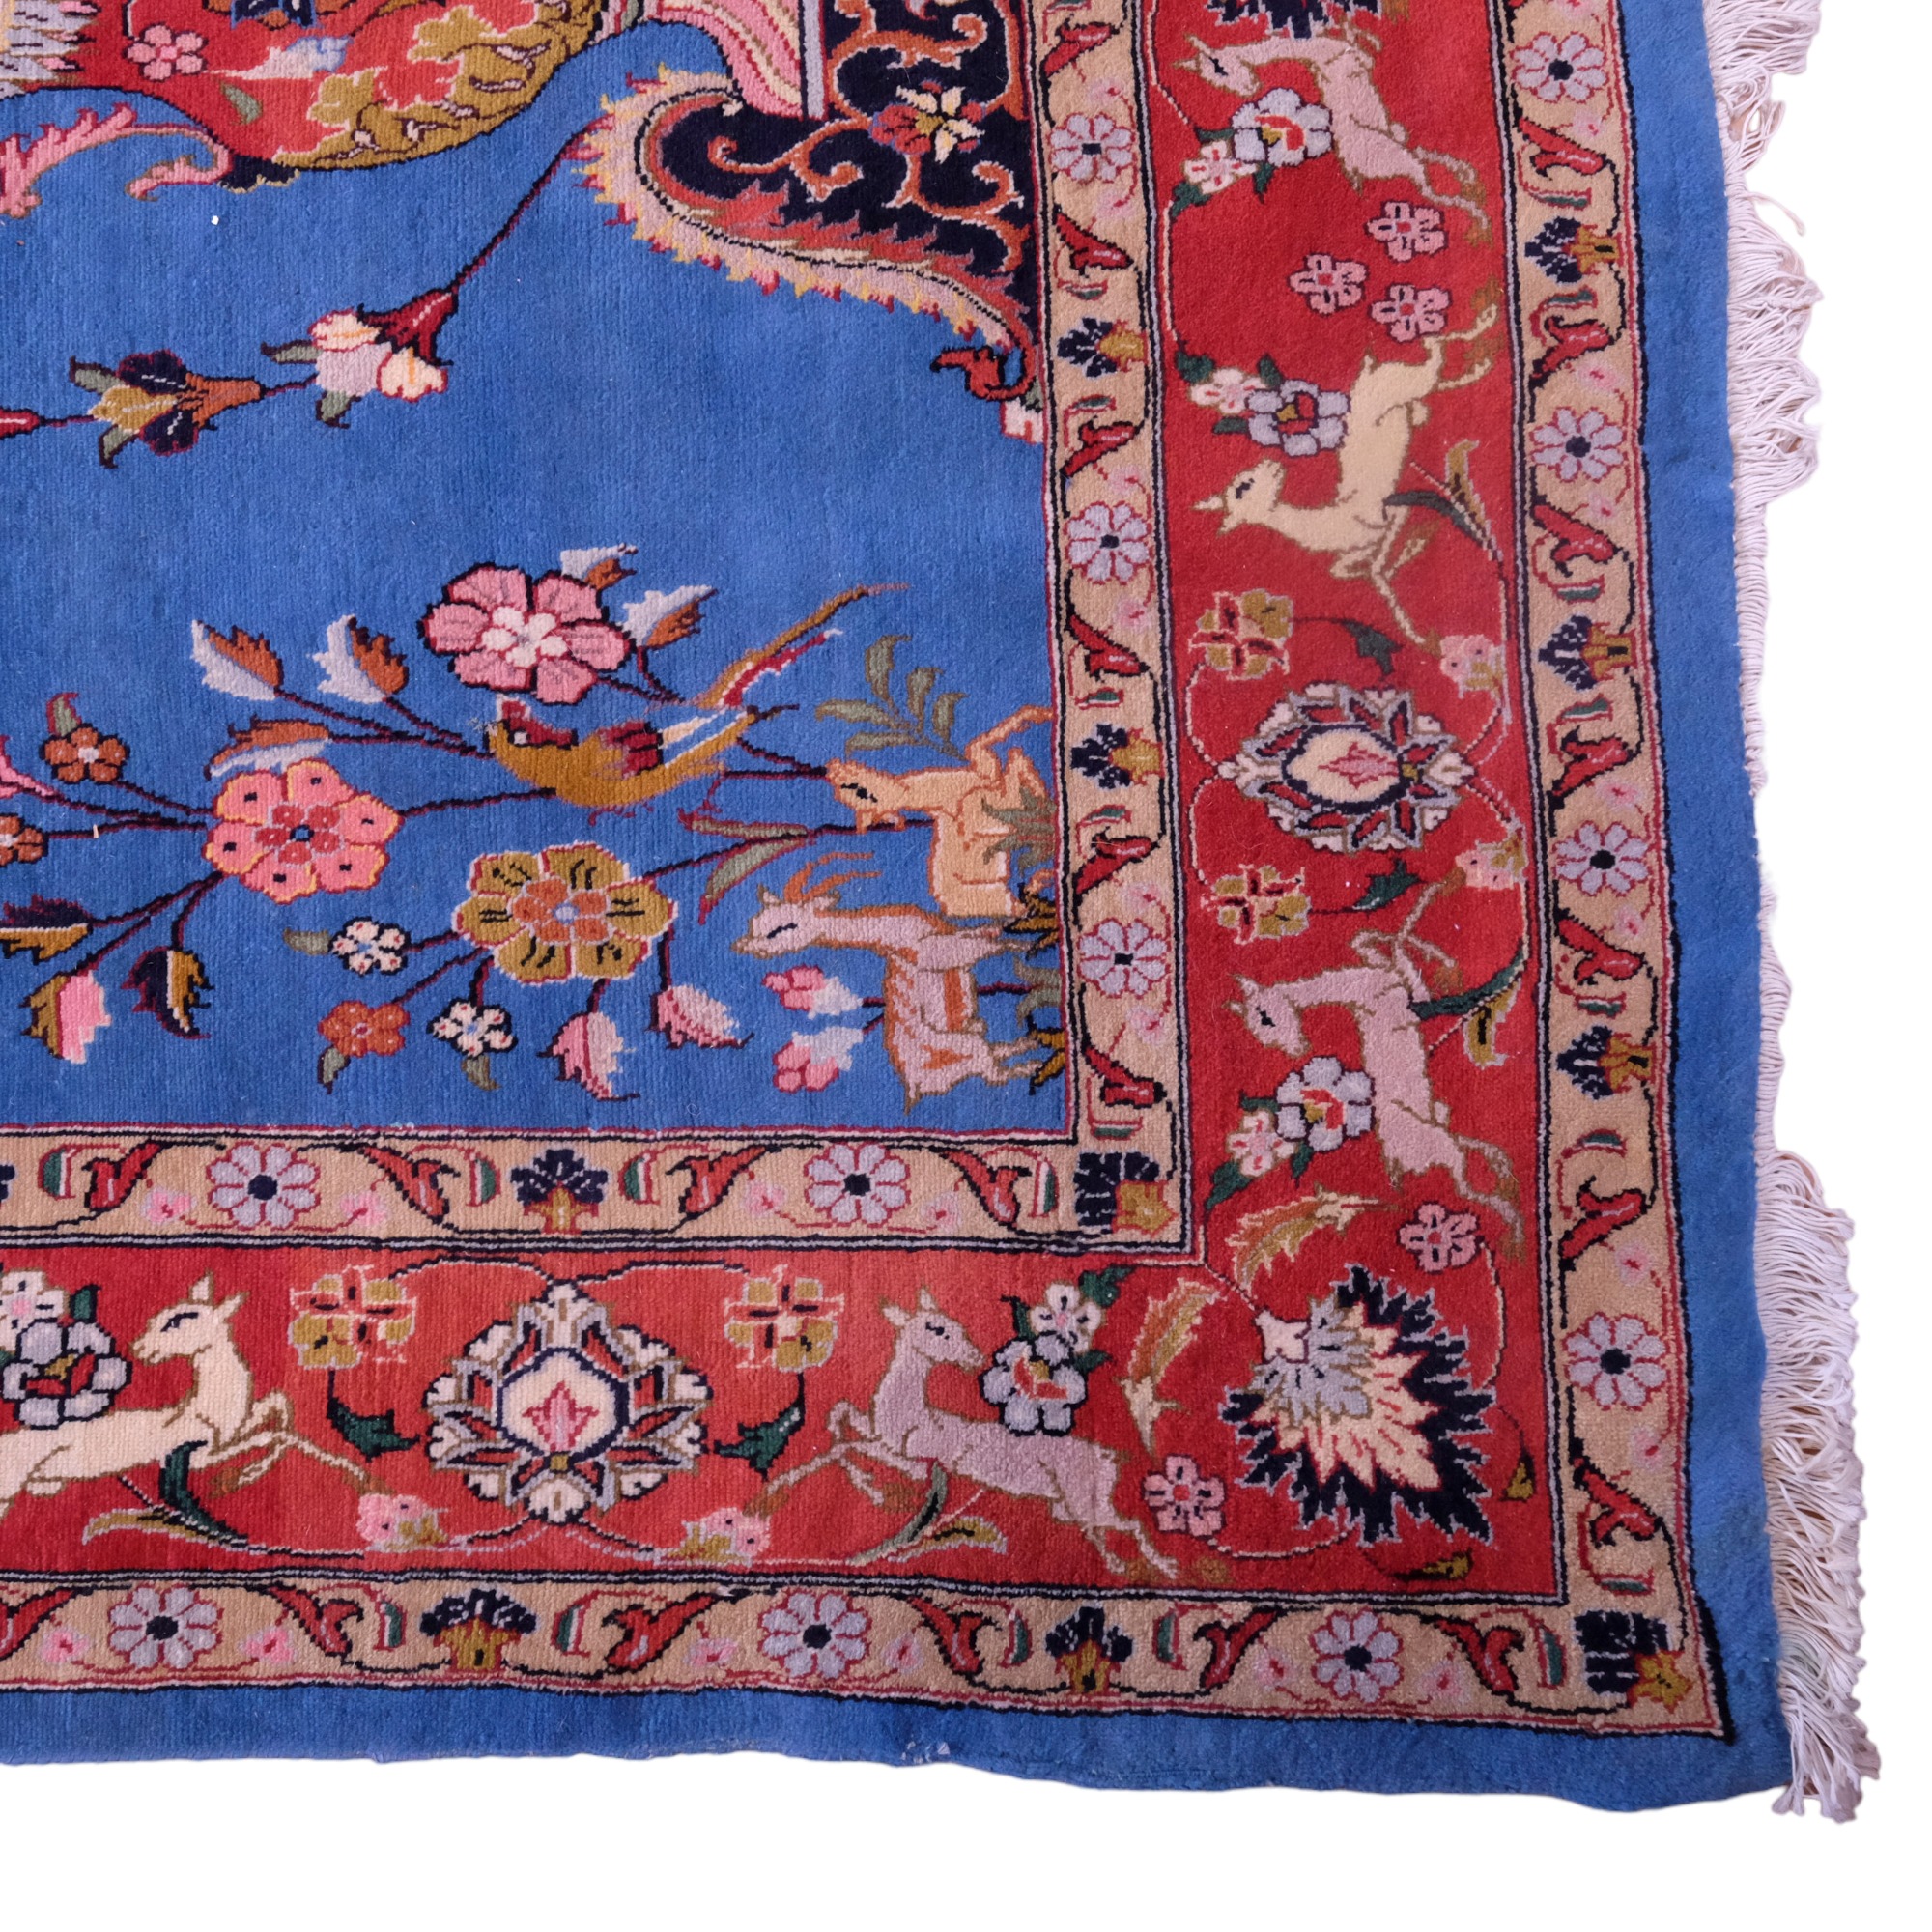 A very fine antique Persian Sarough / Zaronim hand-knotted wool-pile rug, decorated with deer, fawn, - Image 4 of 10